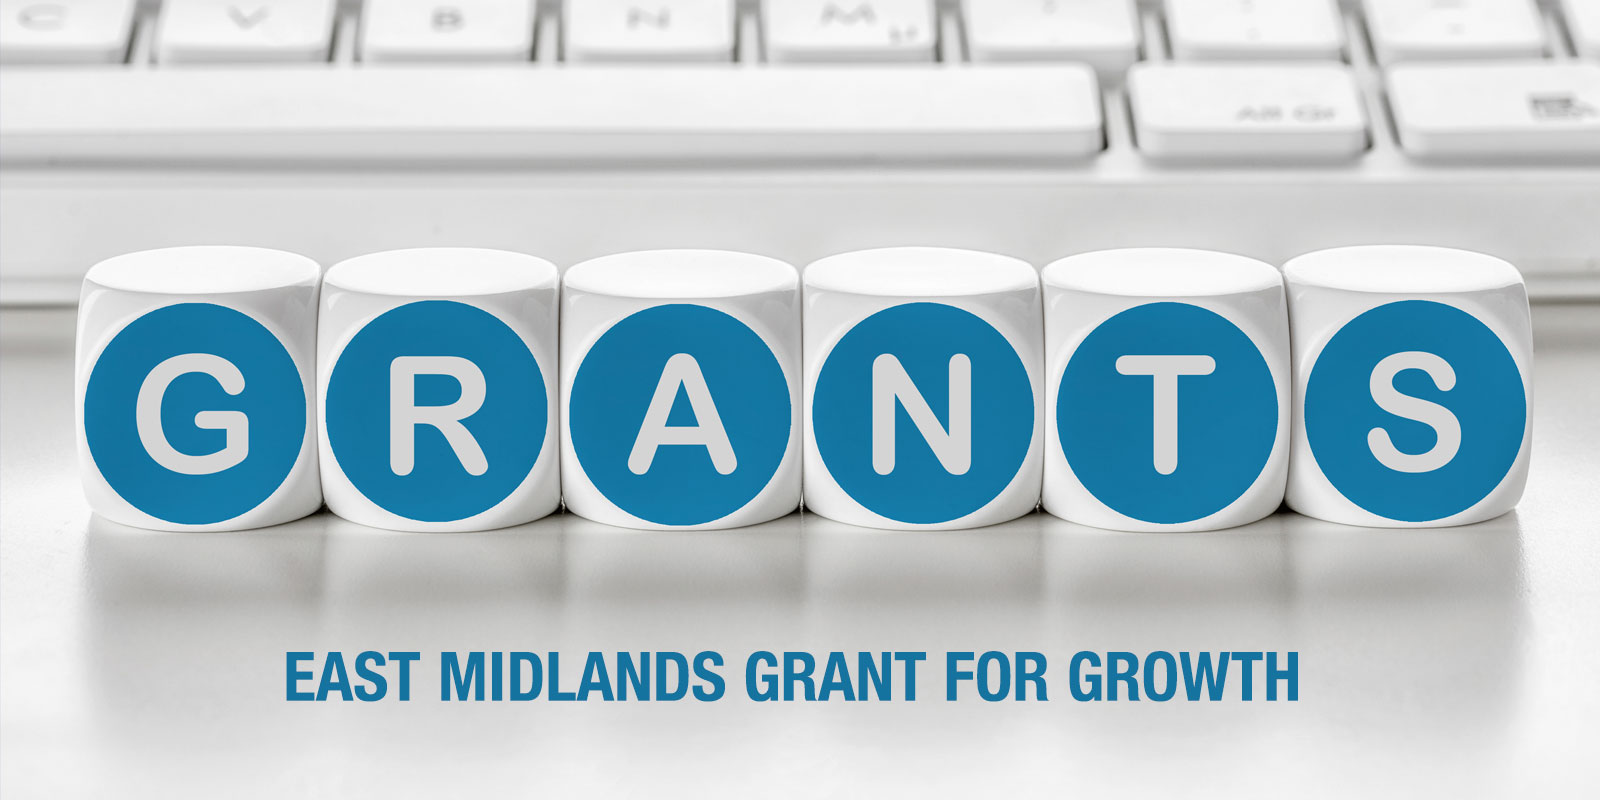 East Midlands Grant for Growth